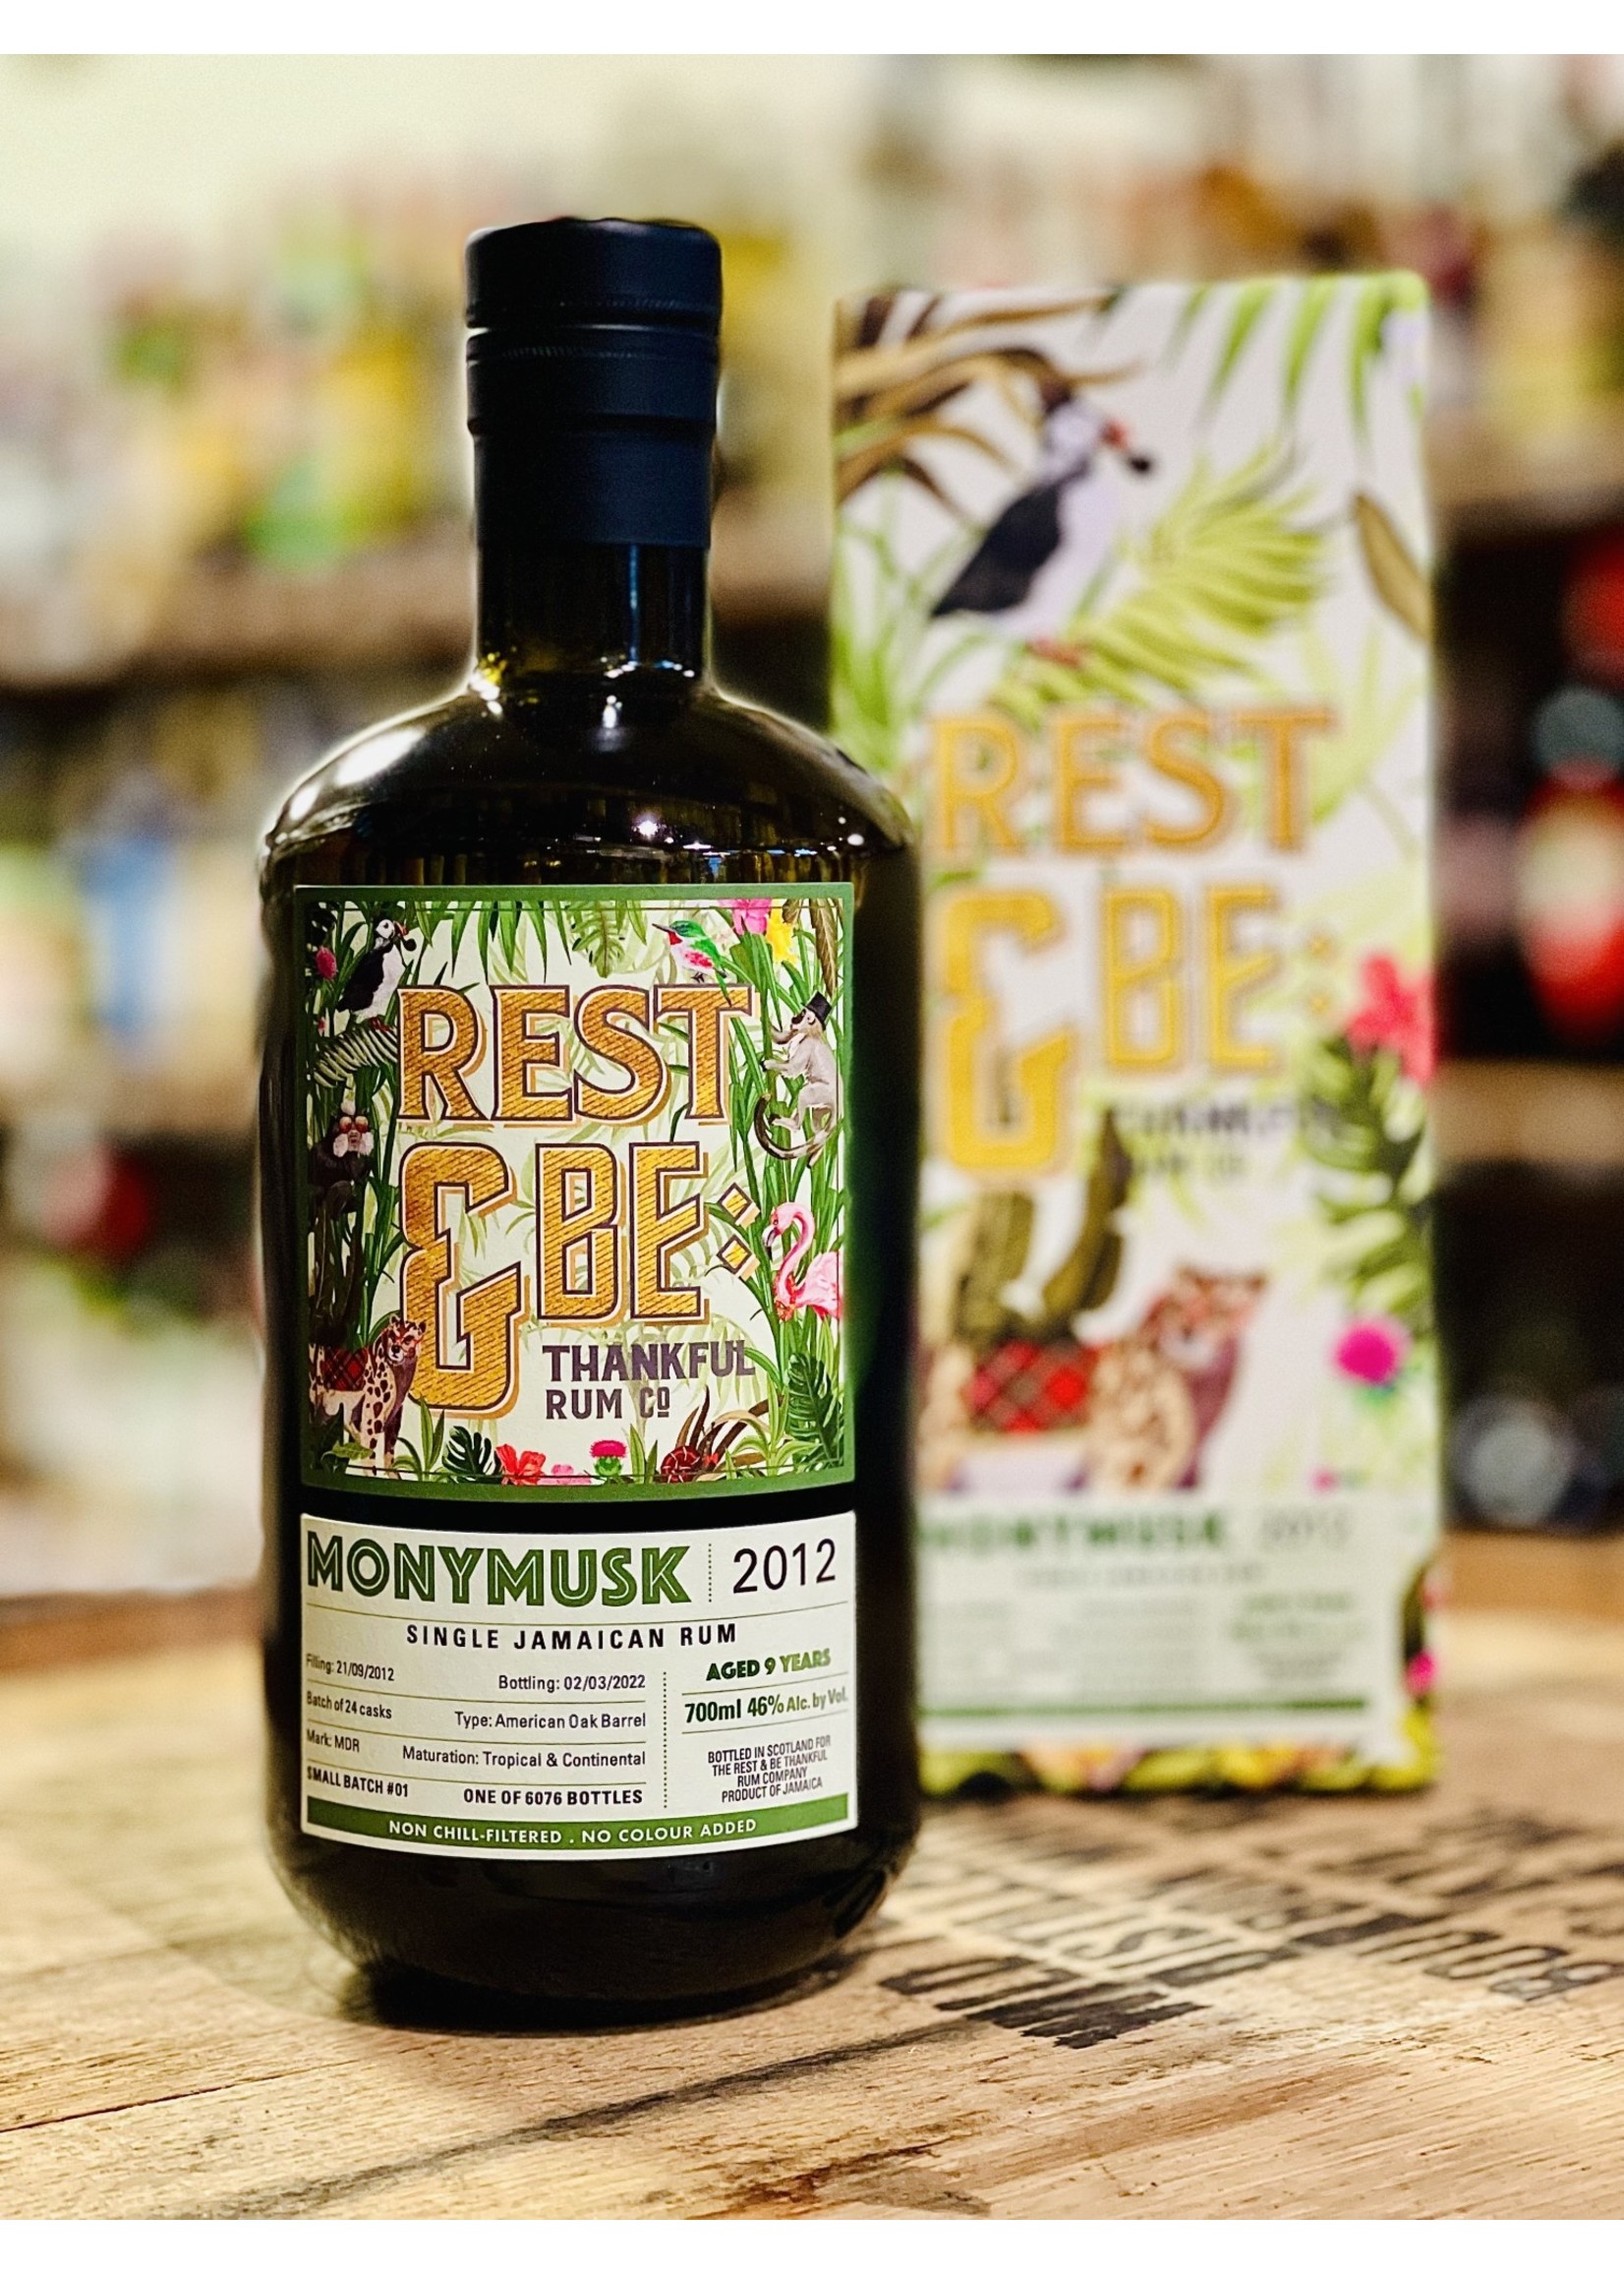 Rest & Be Thankful Rest & Be Thankful / Monymusk 2012 9 Year Old Single Jamaican Rum 46% abv / 700mL